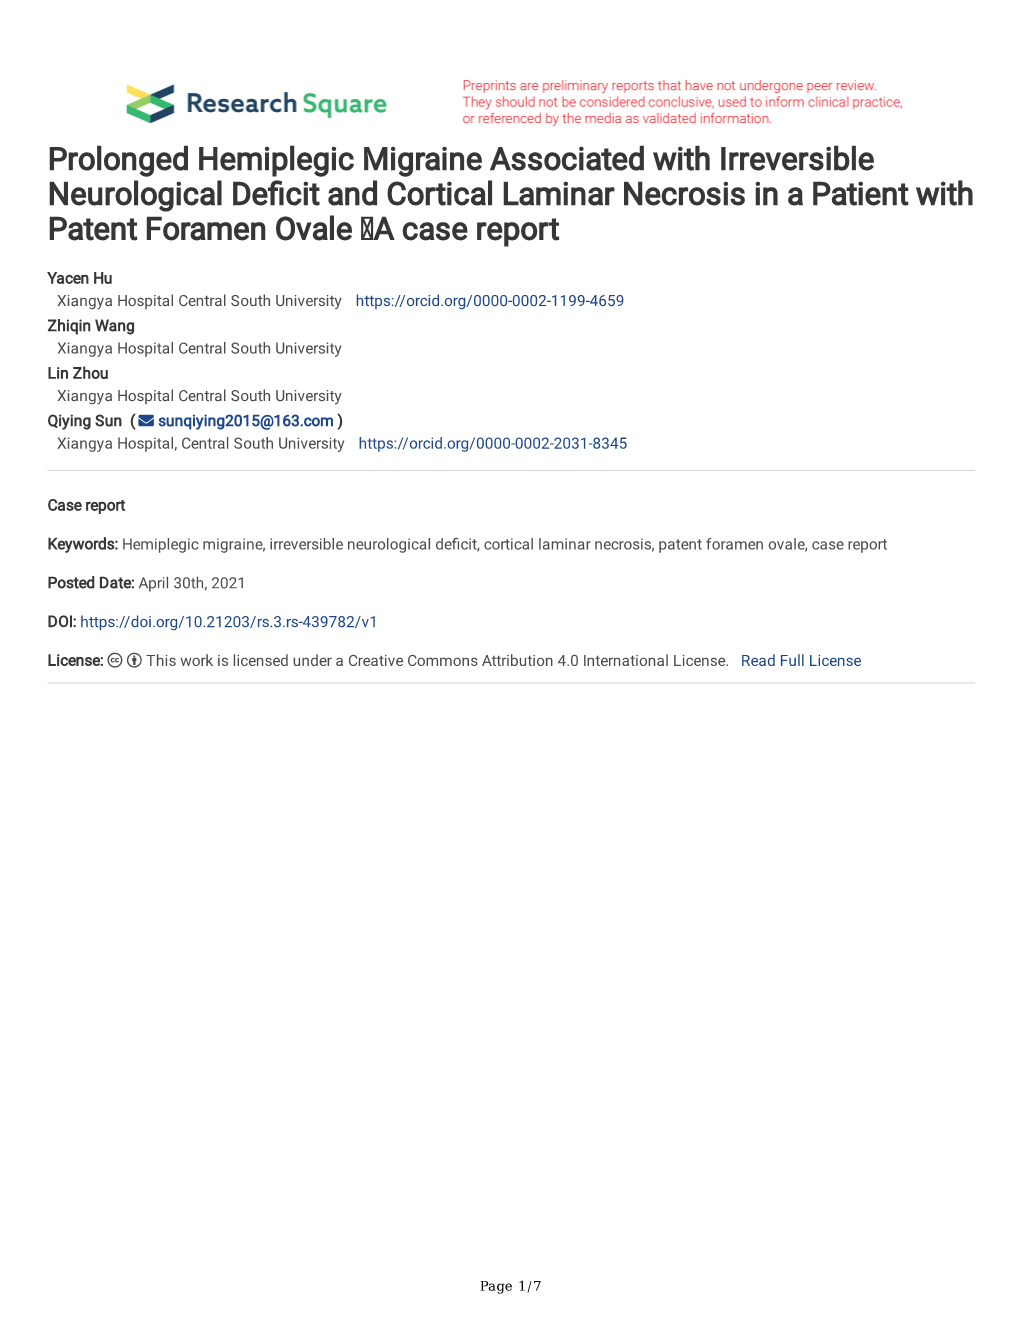 Prolonged Hemiplegic Migraine Associated with Irreversible Neurological Defcit and Cortical Laminar Necrosis in a Patient with Patent Foramen Ovale ：A Case Report